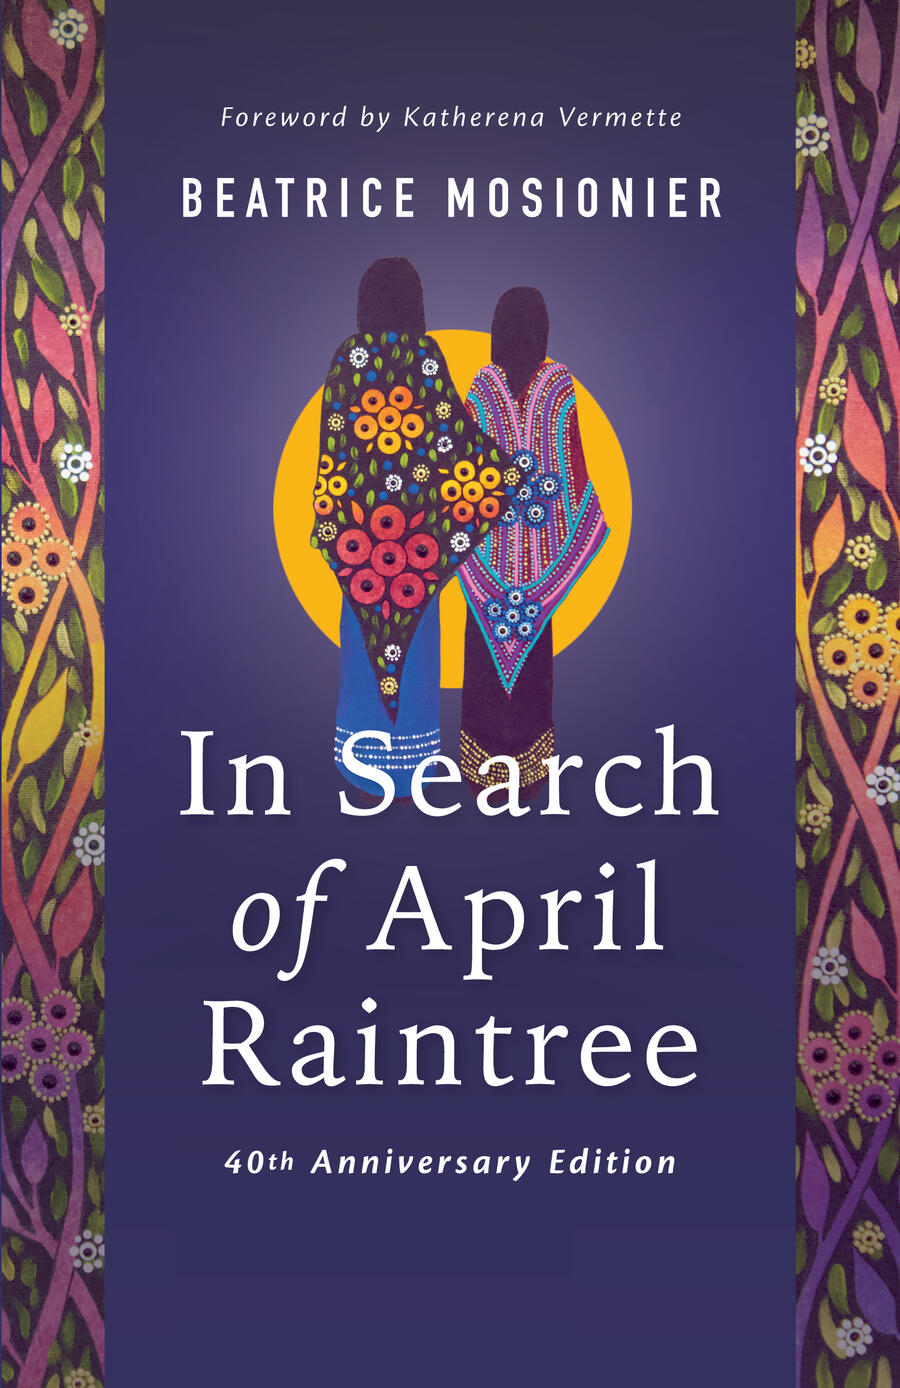 An image shows the cover of Beatrice Mosionier’s novel, In Search of April Raintree, which depicts two women standing side by side, facing the sun, in colourful clothing.